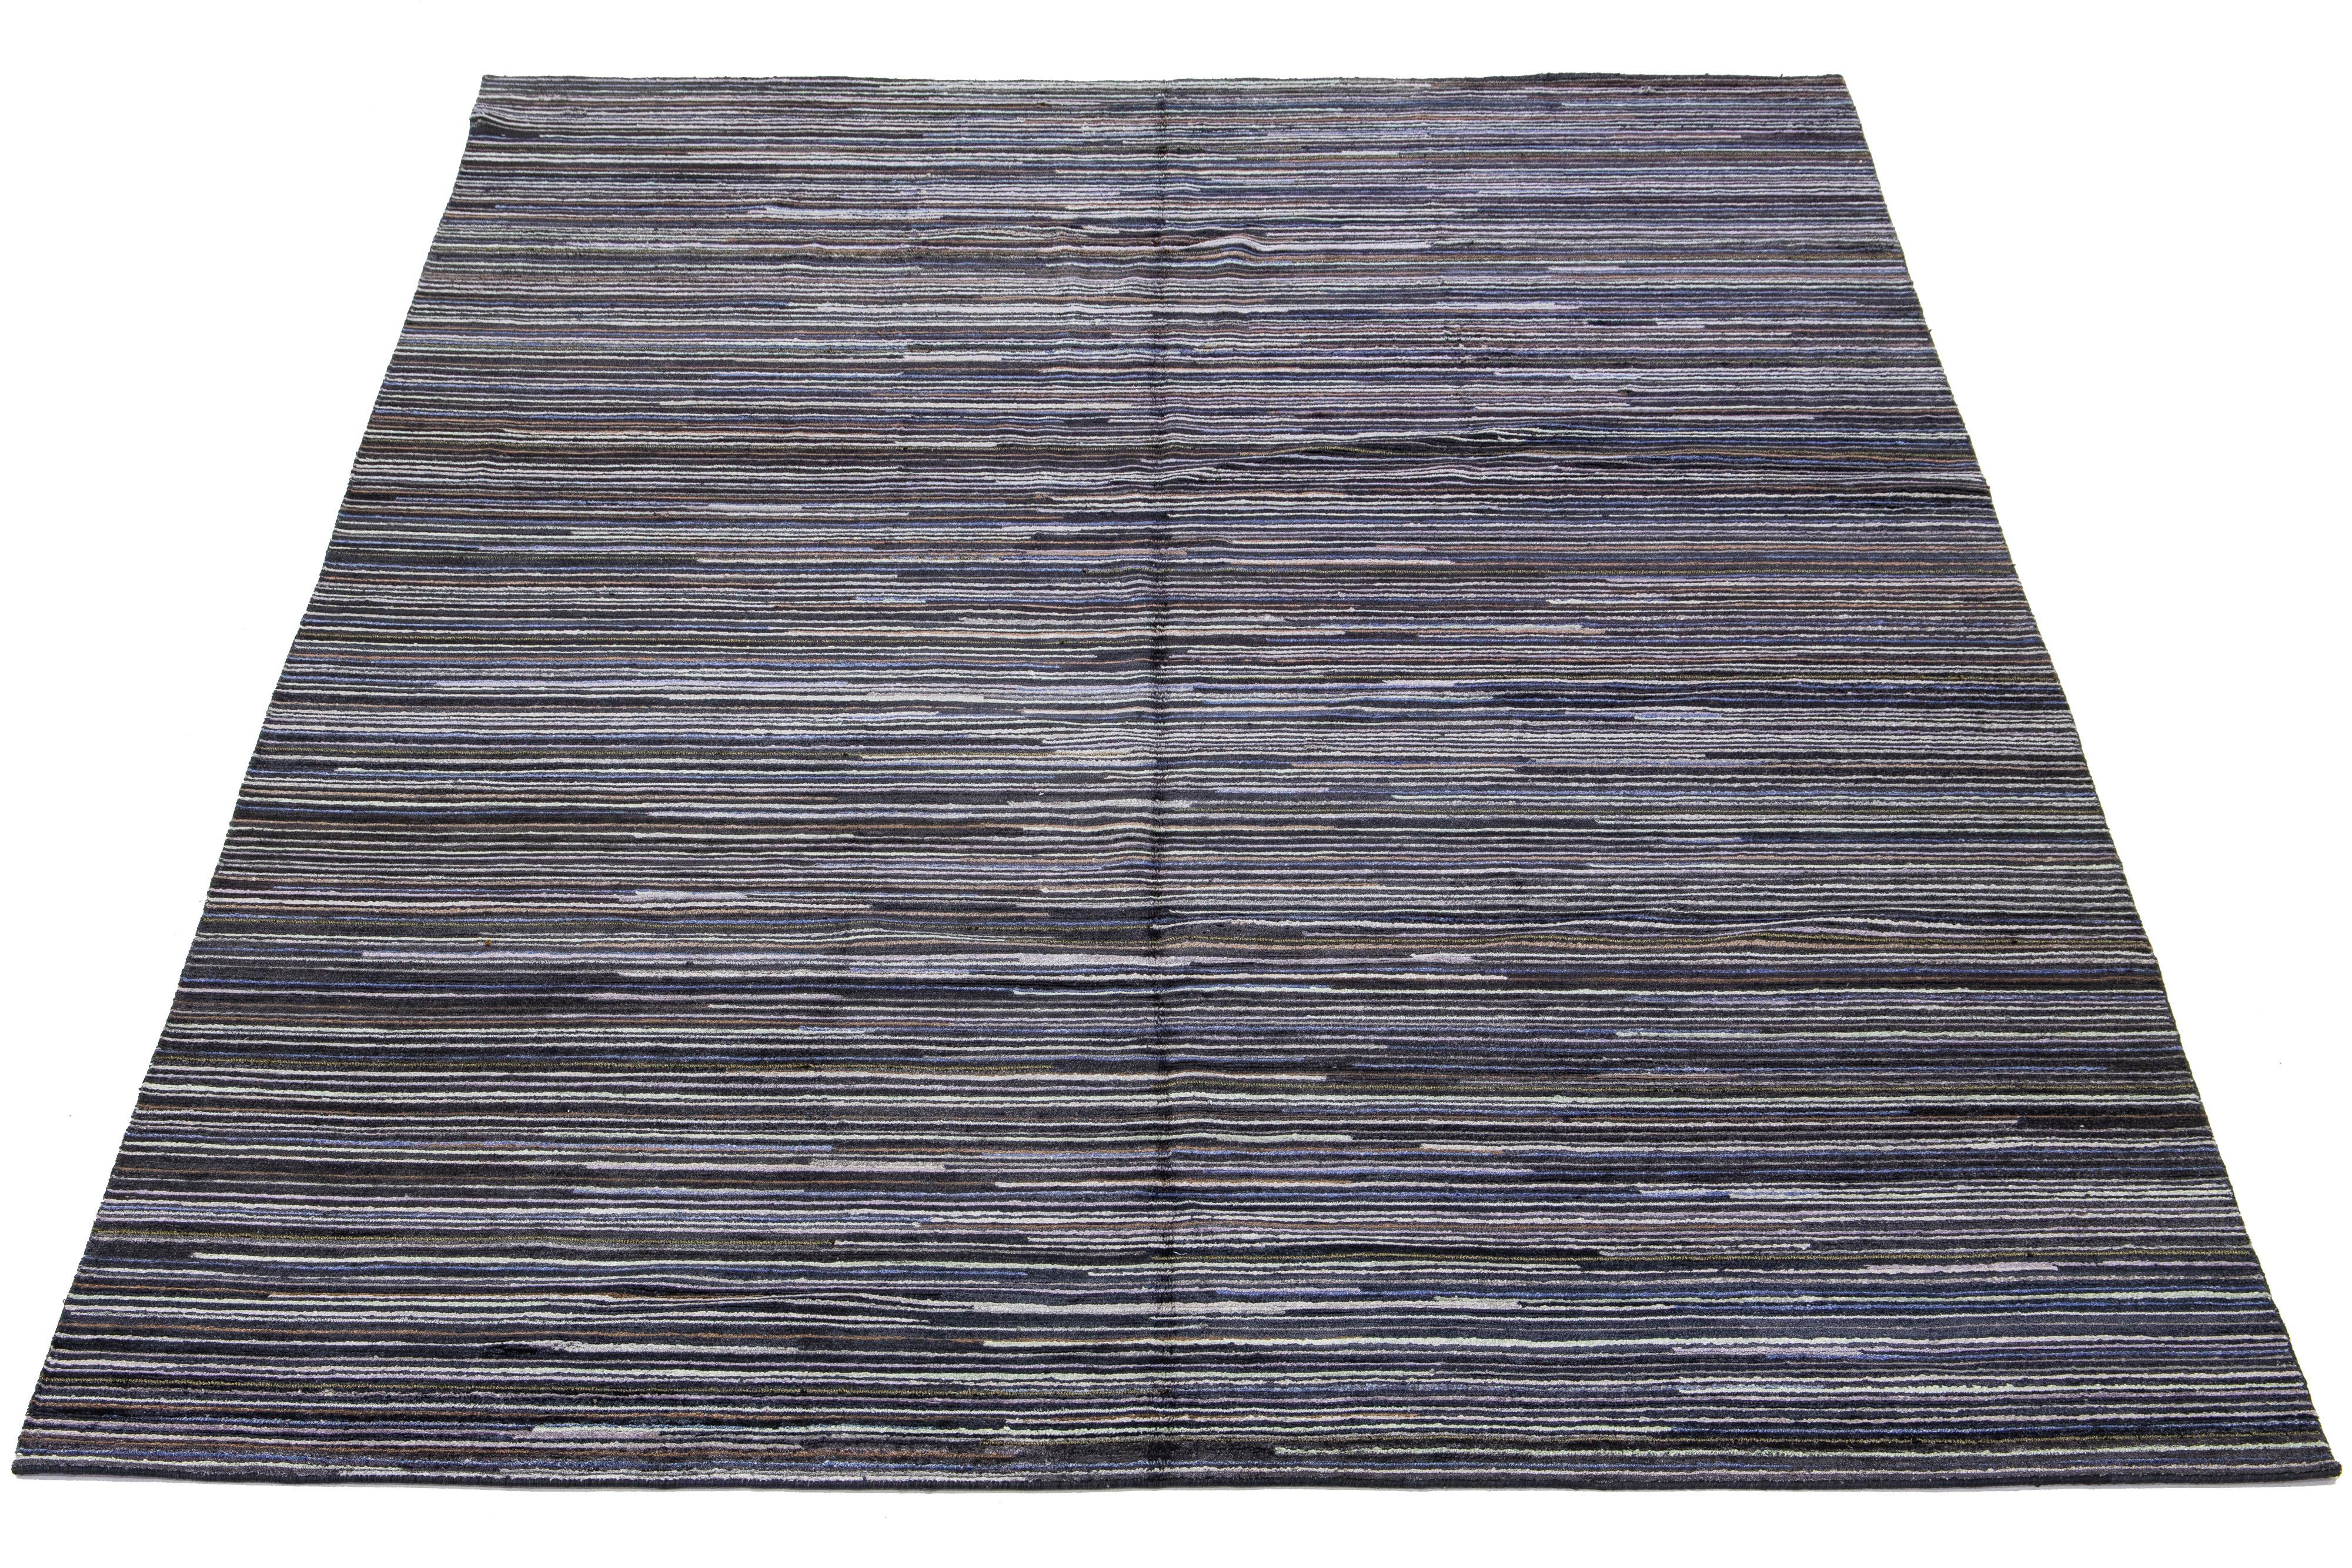 This hand-knotted Indian rug is made from wool and showcases a captivating stripe aesthetic with multicolor accents. It features a naturally hued gray and black background.

This rug measures 10' x 14'4